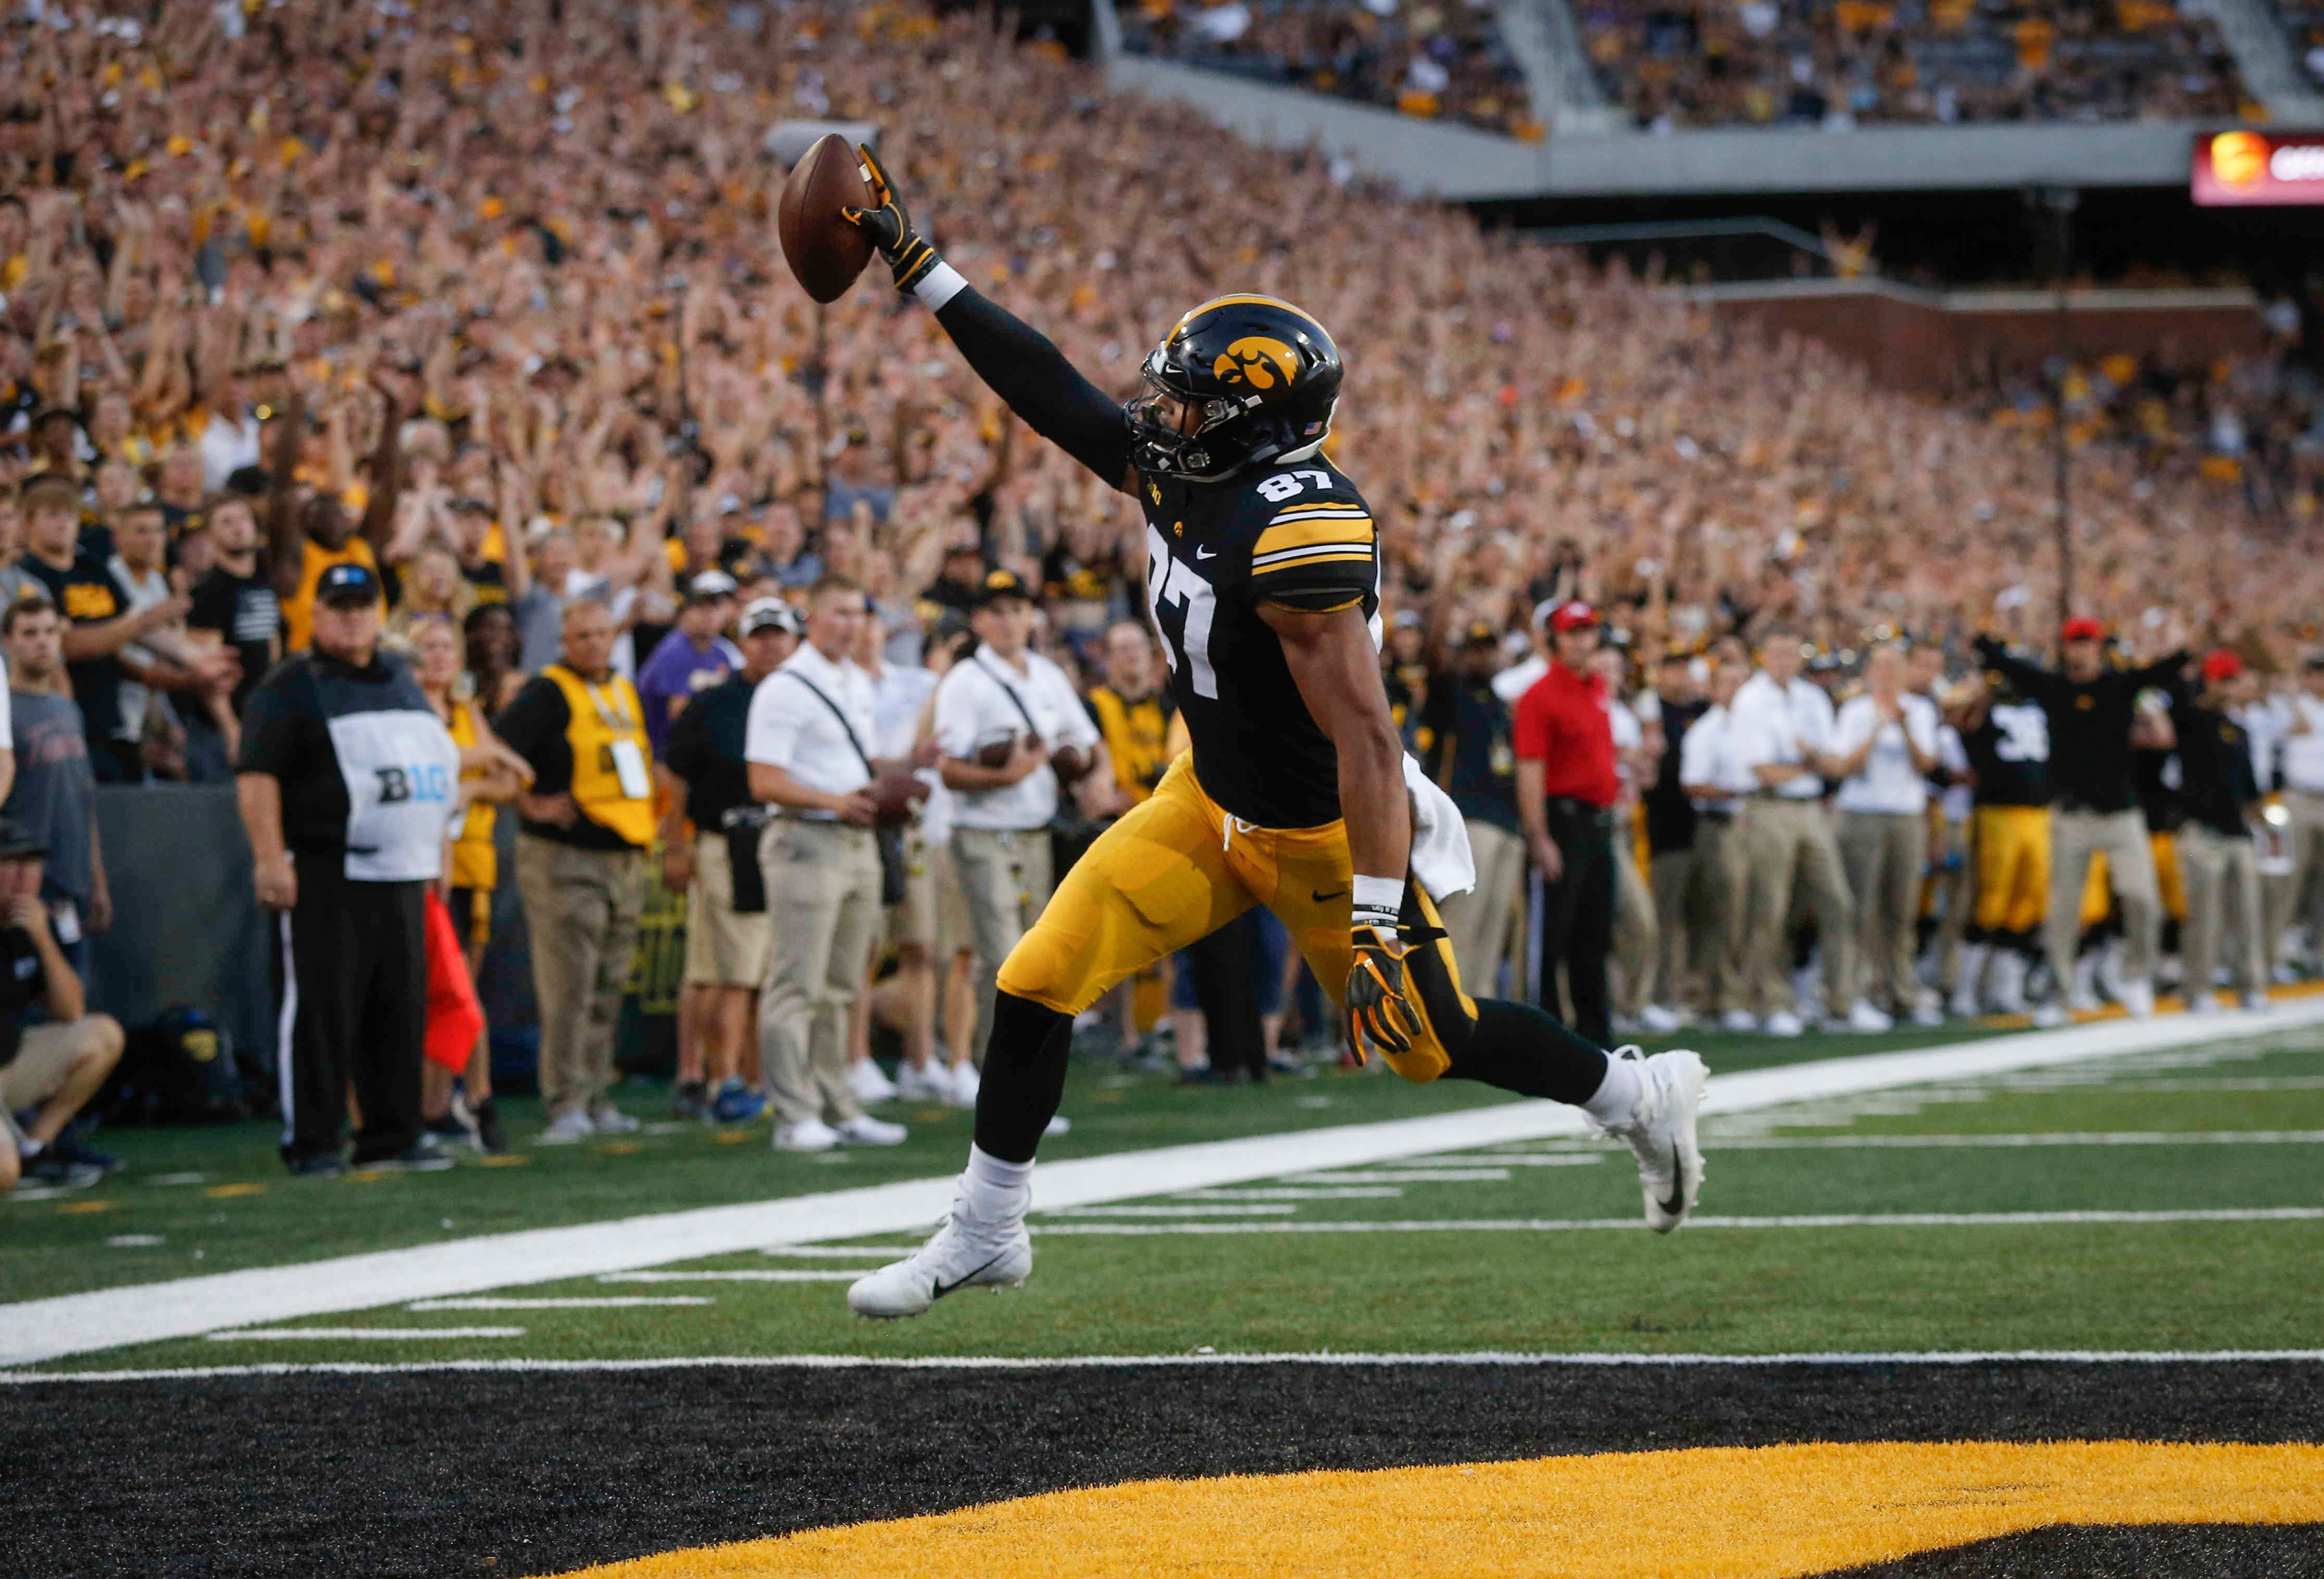 Iowa junior tight end Noah Fant celebrates in the end zone after scoring a touchdown against Northern Iowa in the first quarter on Saturday, Sept. 15, 2018, at Kinnick Stadium in Iowa City.